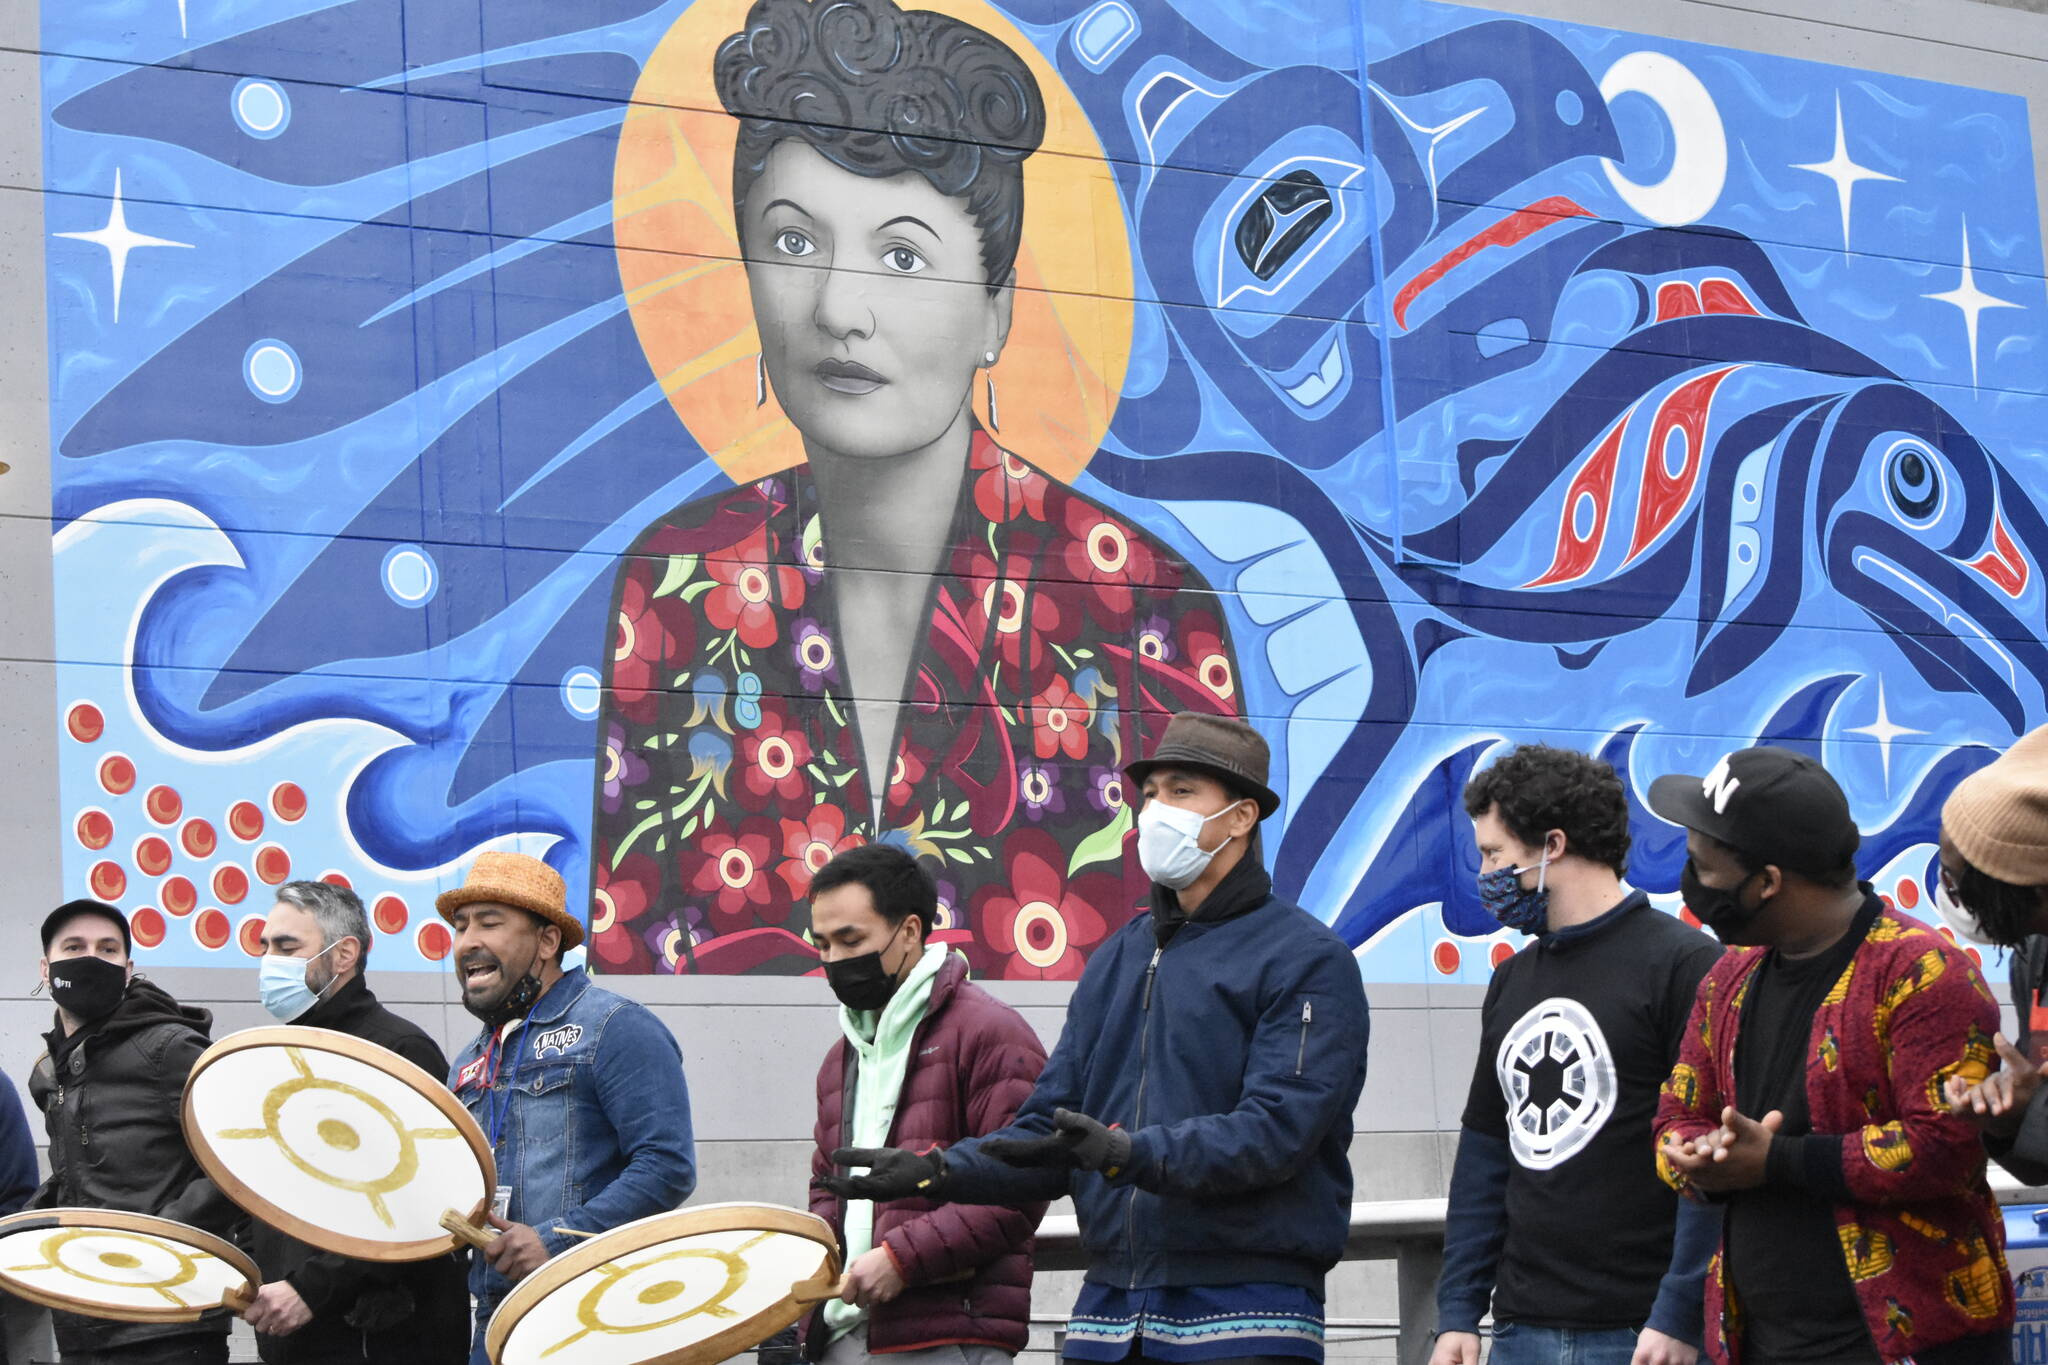 Peter Segall / Juneau Empire 
Artists of the inaugural Rock Aak’w Indigenous Music Festival gather beneath the mural of Elizabeth Peratrovich on the Juneau waterfront on Friday, Nov. 5, 2021. This year the ceremony was all virtual, but organizers wanted to open the festival in person.